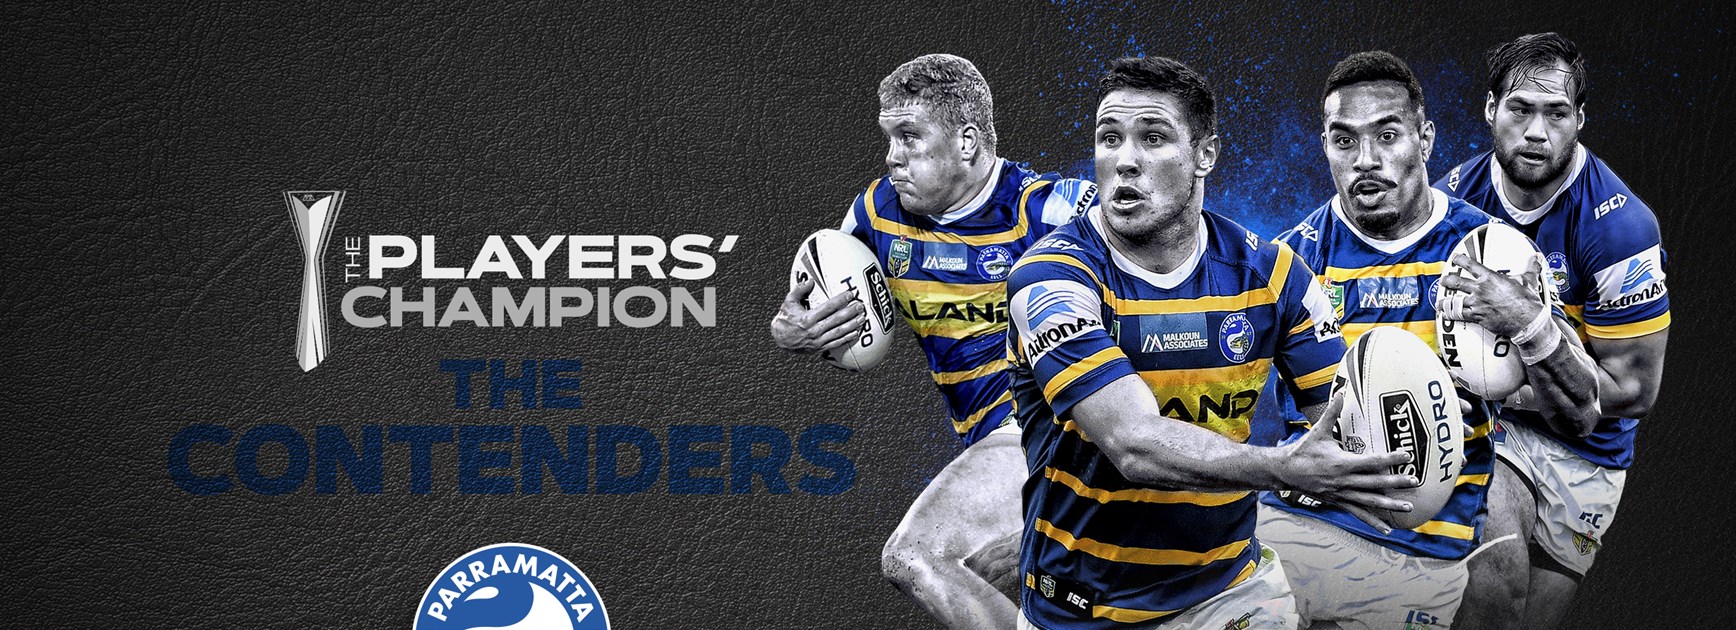 RLPA launches The Players’ Champion Award for 2018